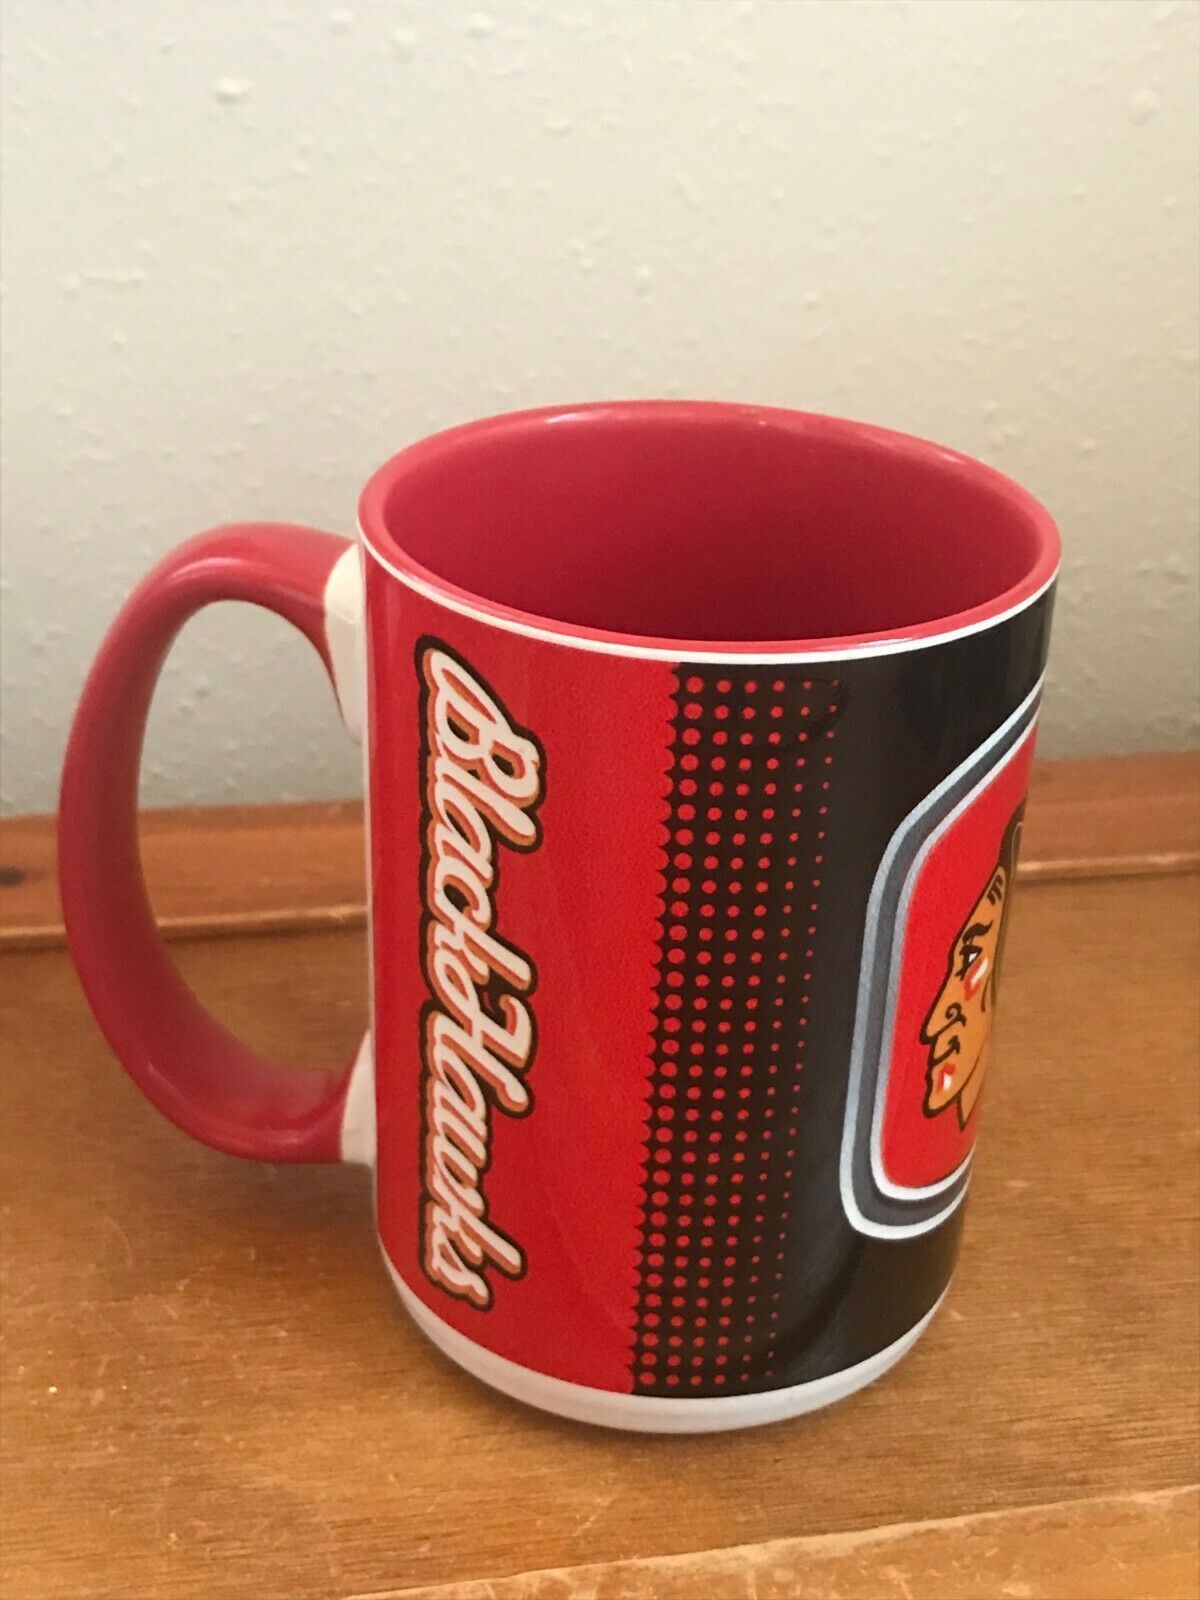 Gently Used Large Chicago BlackHawks Hockey Red Black & White Ceramic Coffee Cup - $13.99